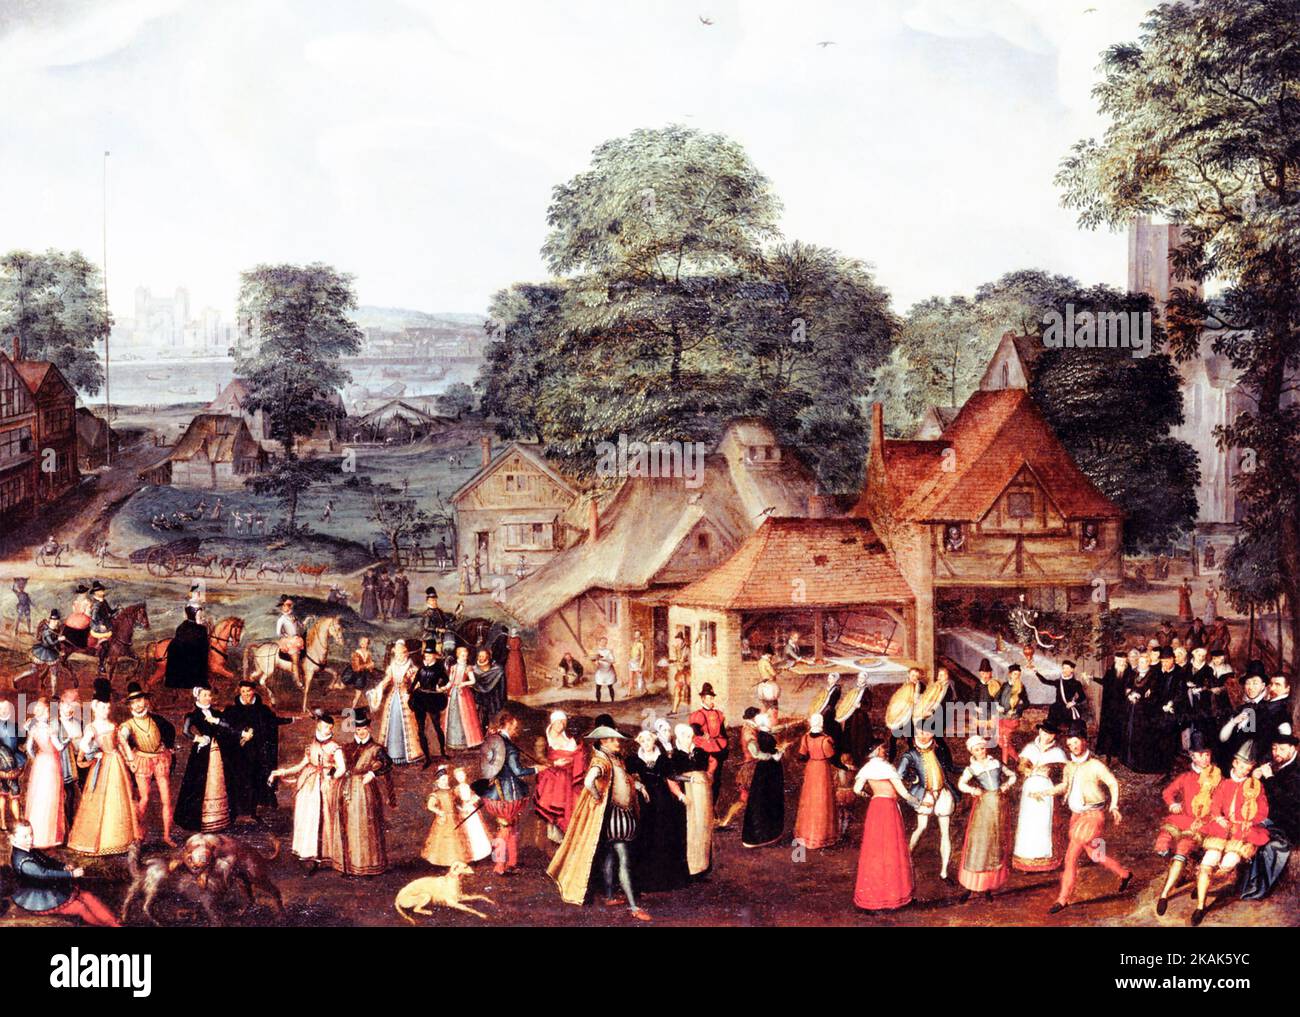 FESTIVAL AT BERMONDSEY by Marcus Gheeraerts the Elder about 1569. Stock Photo